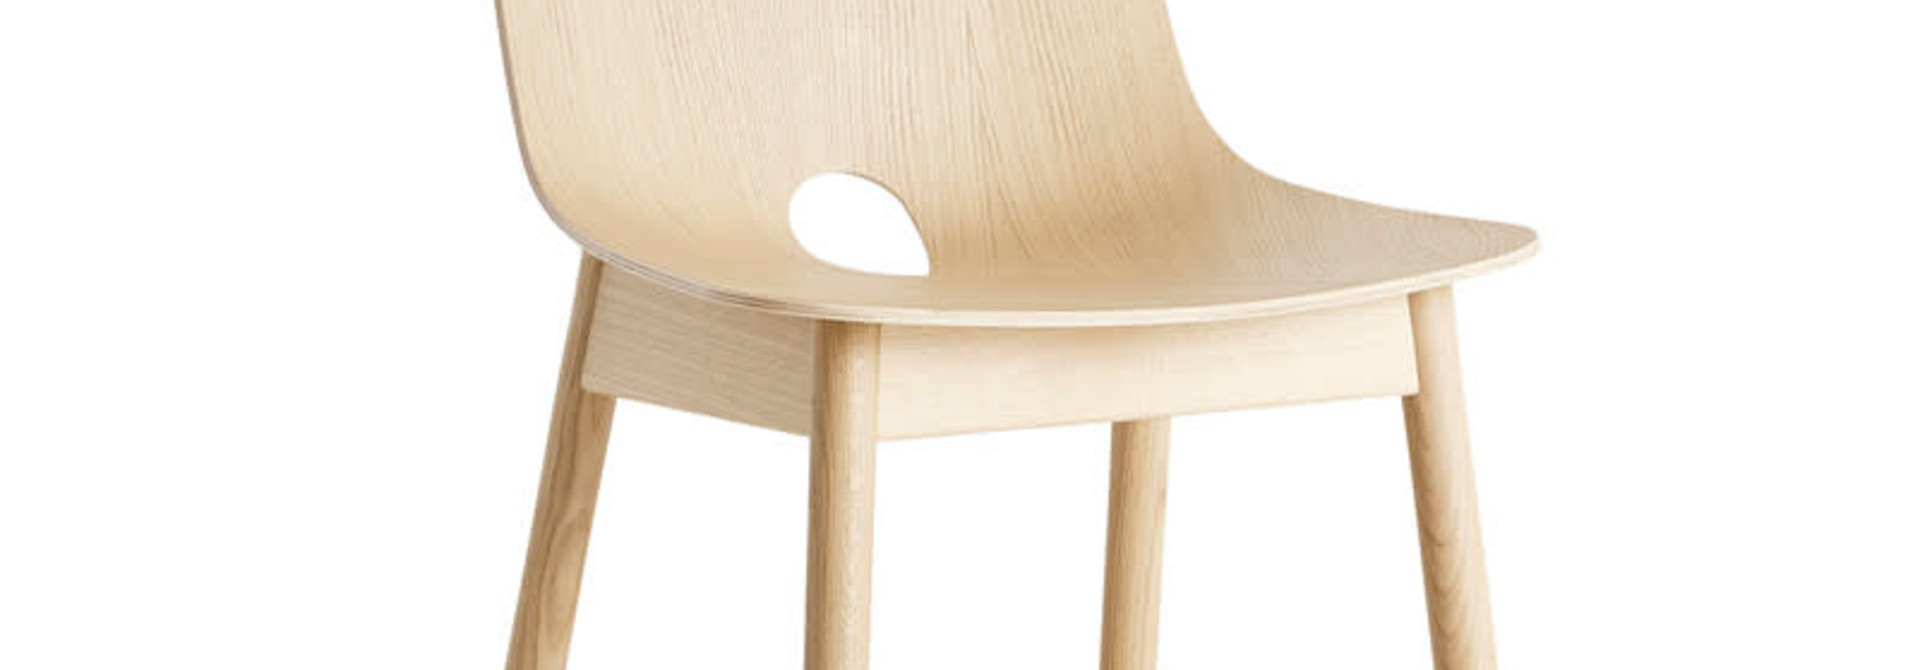 Mono dining chair